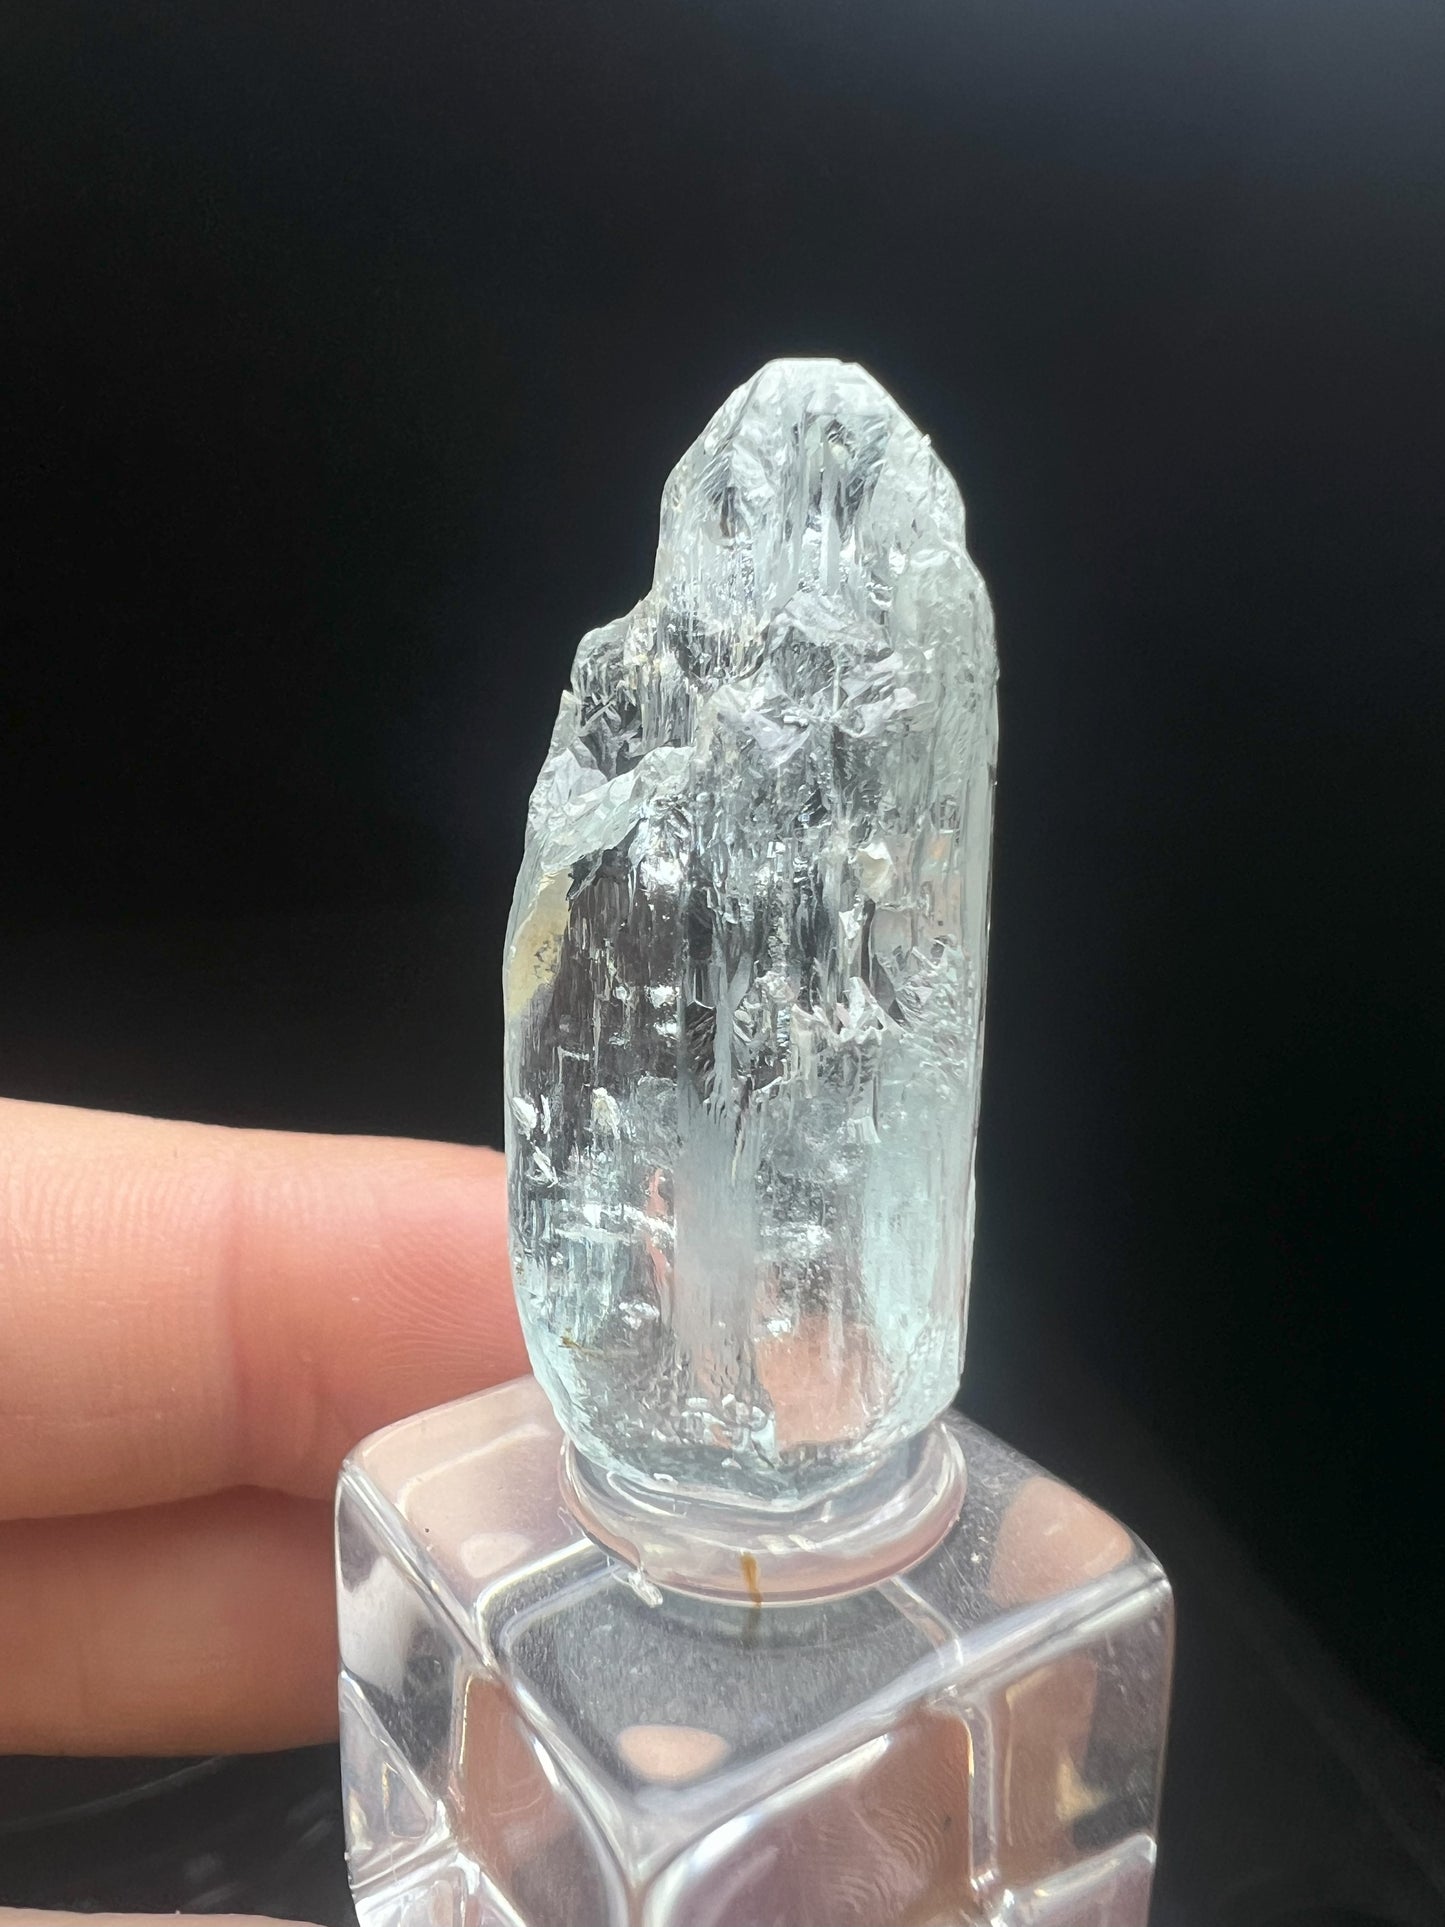 Phenomenal Natural Rough Water Etched Aquamarine Specimen From Brazil (Stand Included)- Home décor, Collectors piece